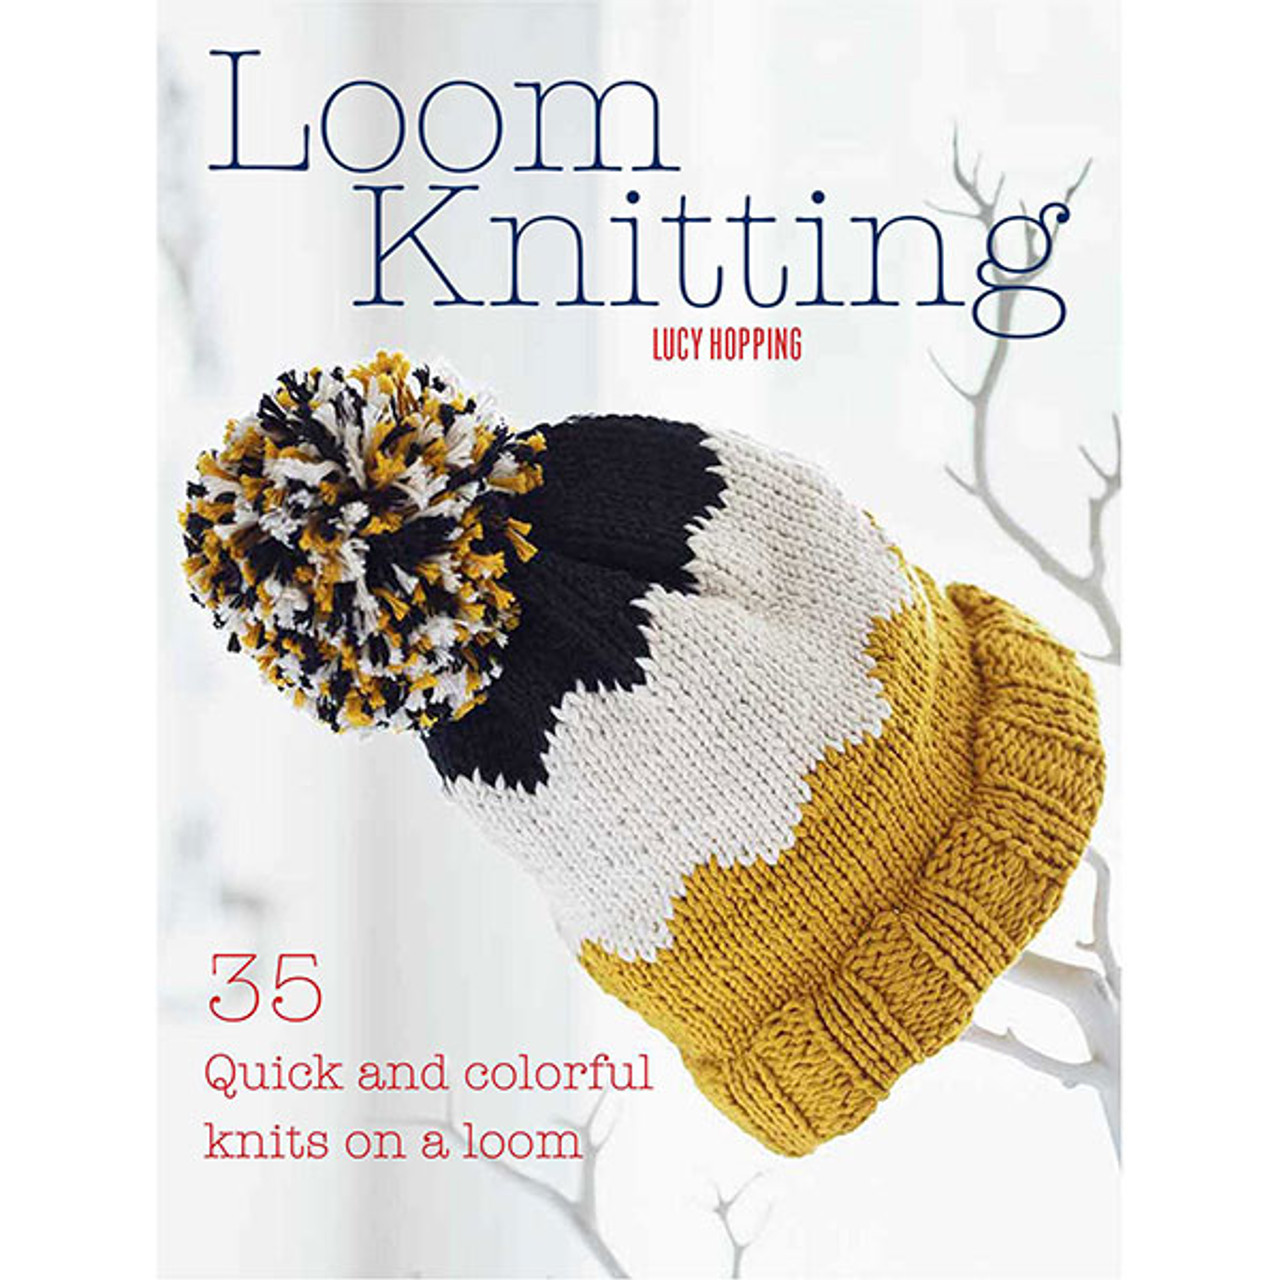 Loom Knitting: An Overview - Textile Magazine, Textile News